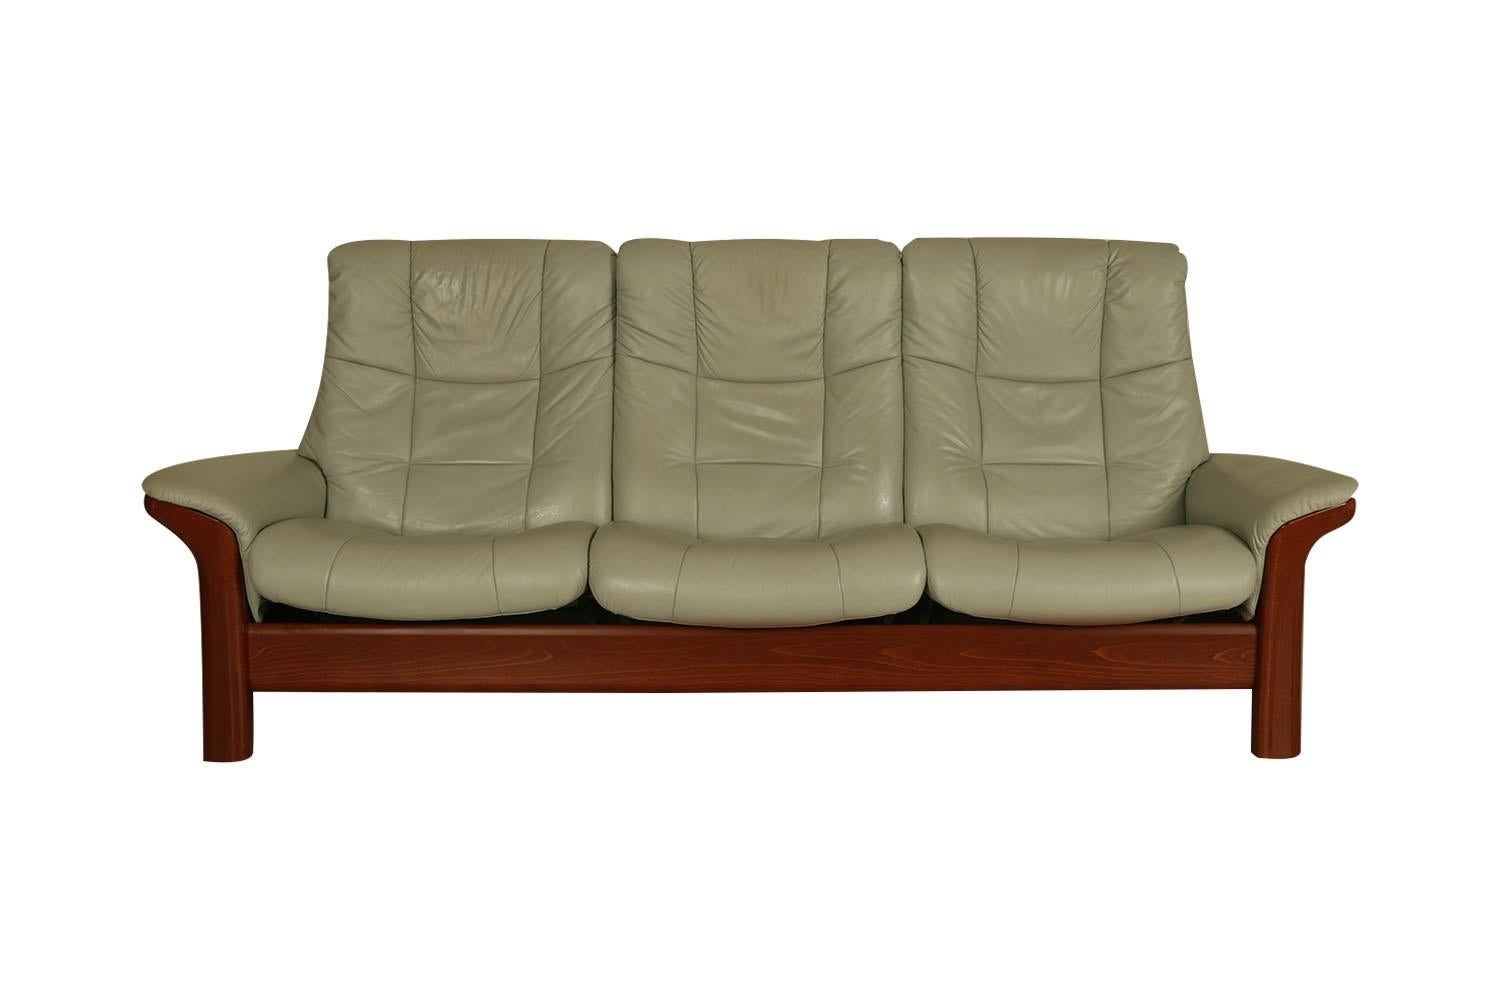 Mid-Century Modern, stylish 3 seat Ekornes Stressless reclining sofa manufactured by Ekornes in Norway.  This outstanding high back sofa features rich, leather upholstery, and adjustable, reclining back support.  All three seats recline and feature